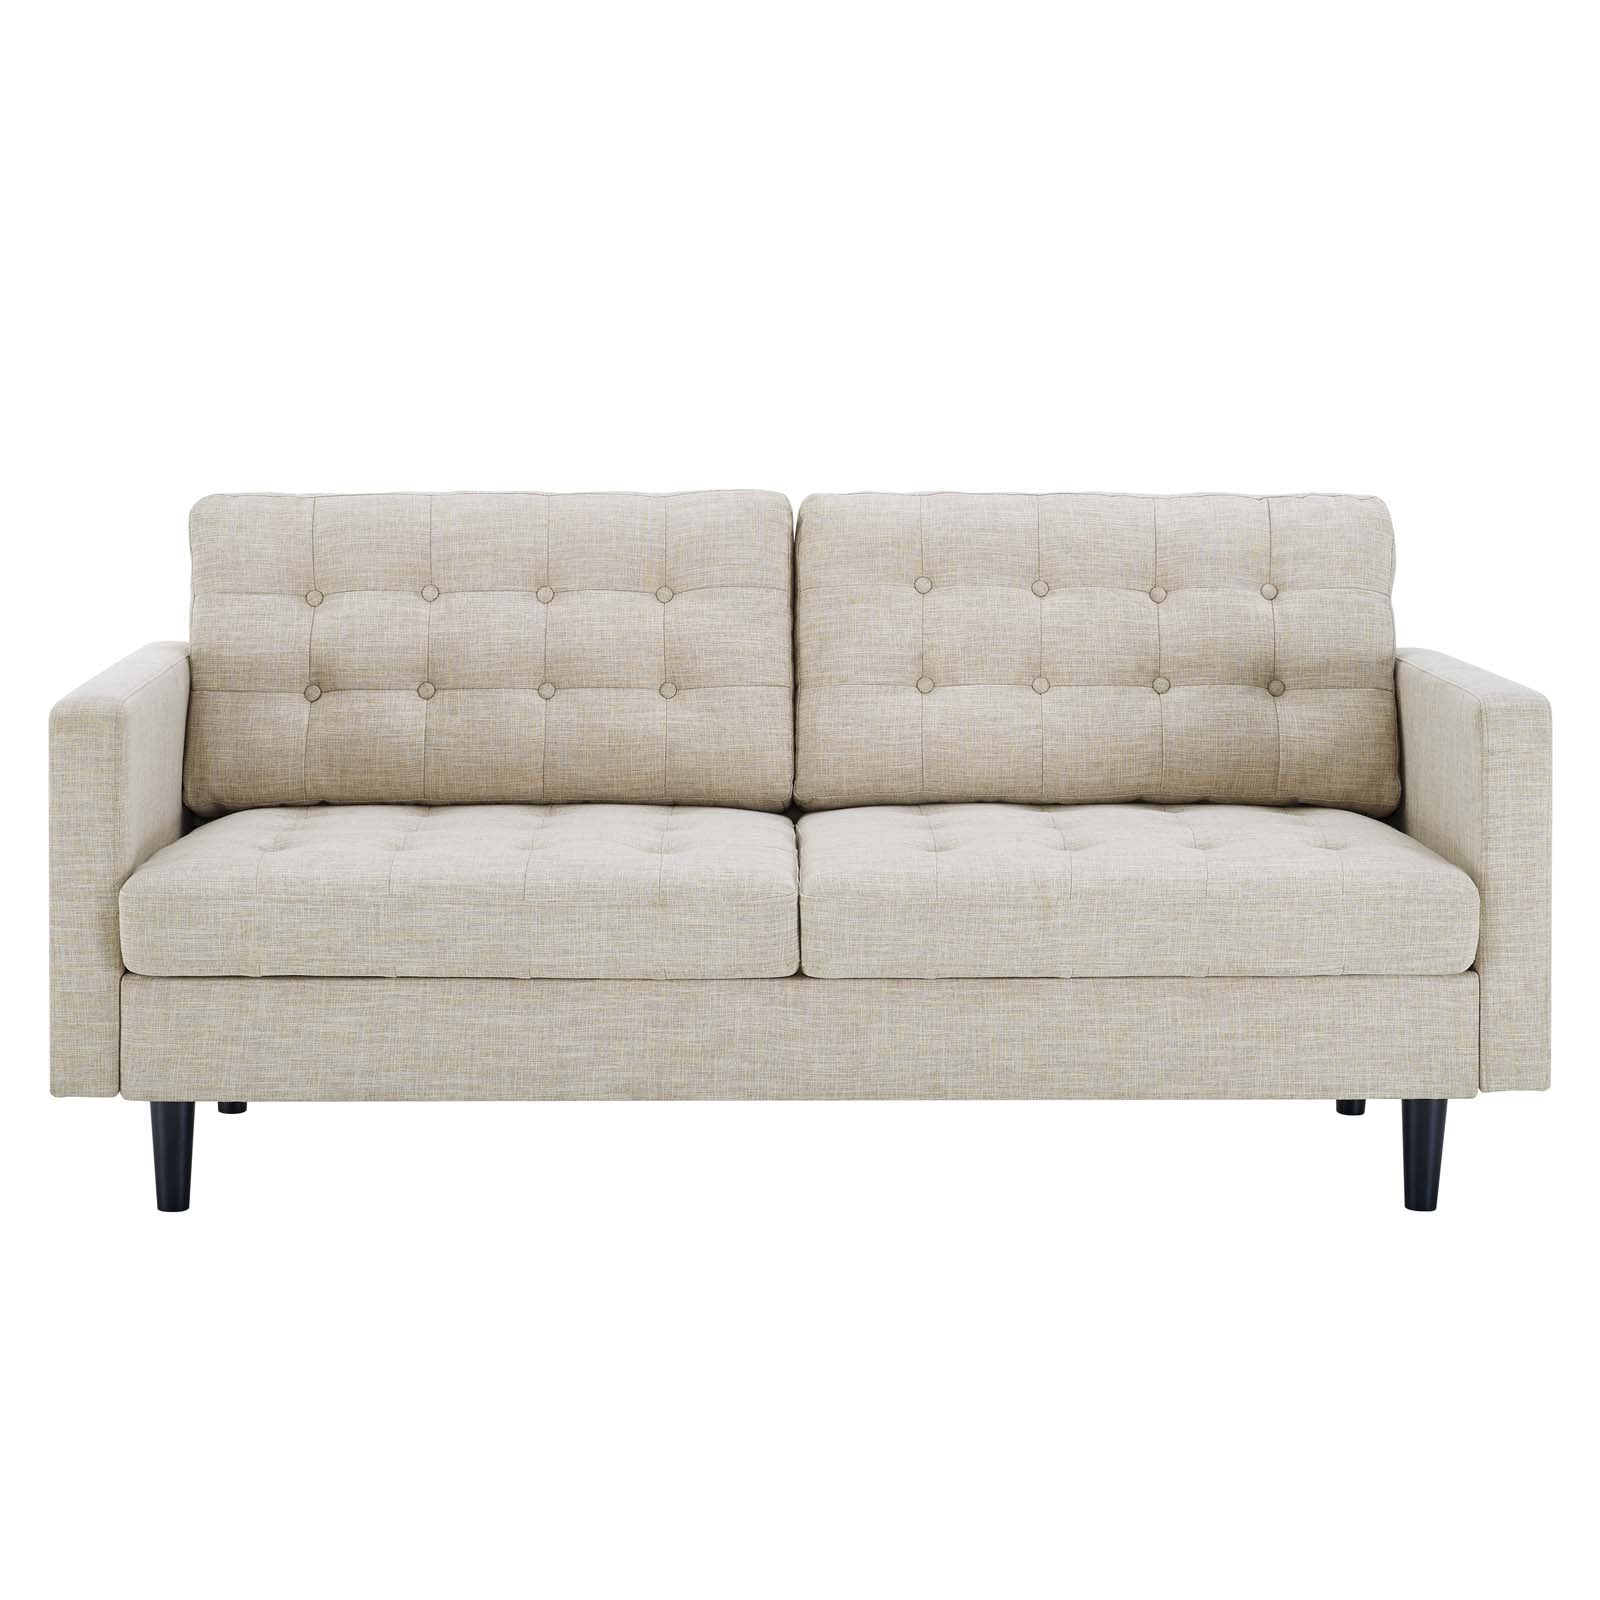 Modway Sofas & Couches - Exalt Tufted Fabric Sofa Beige